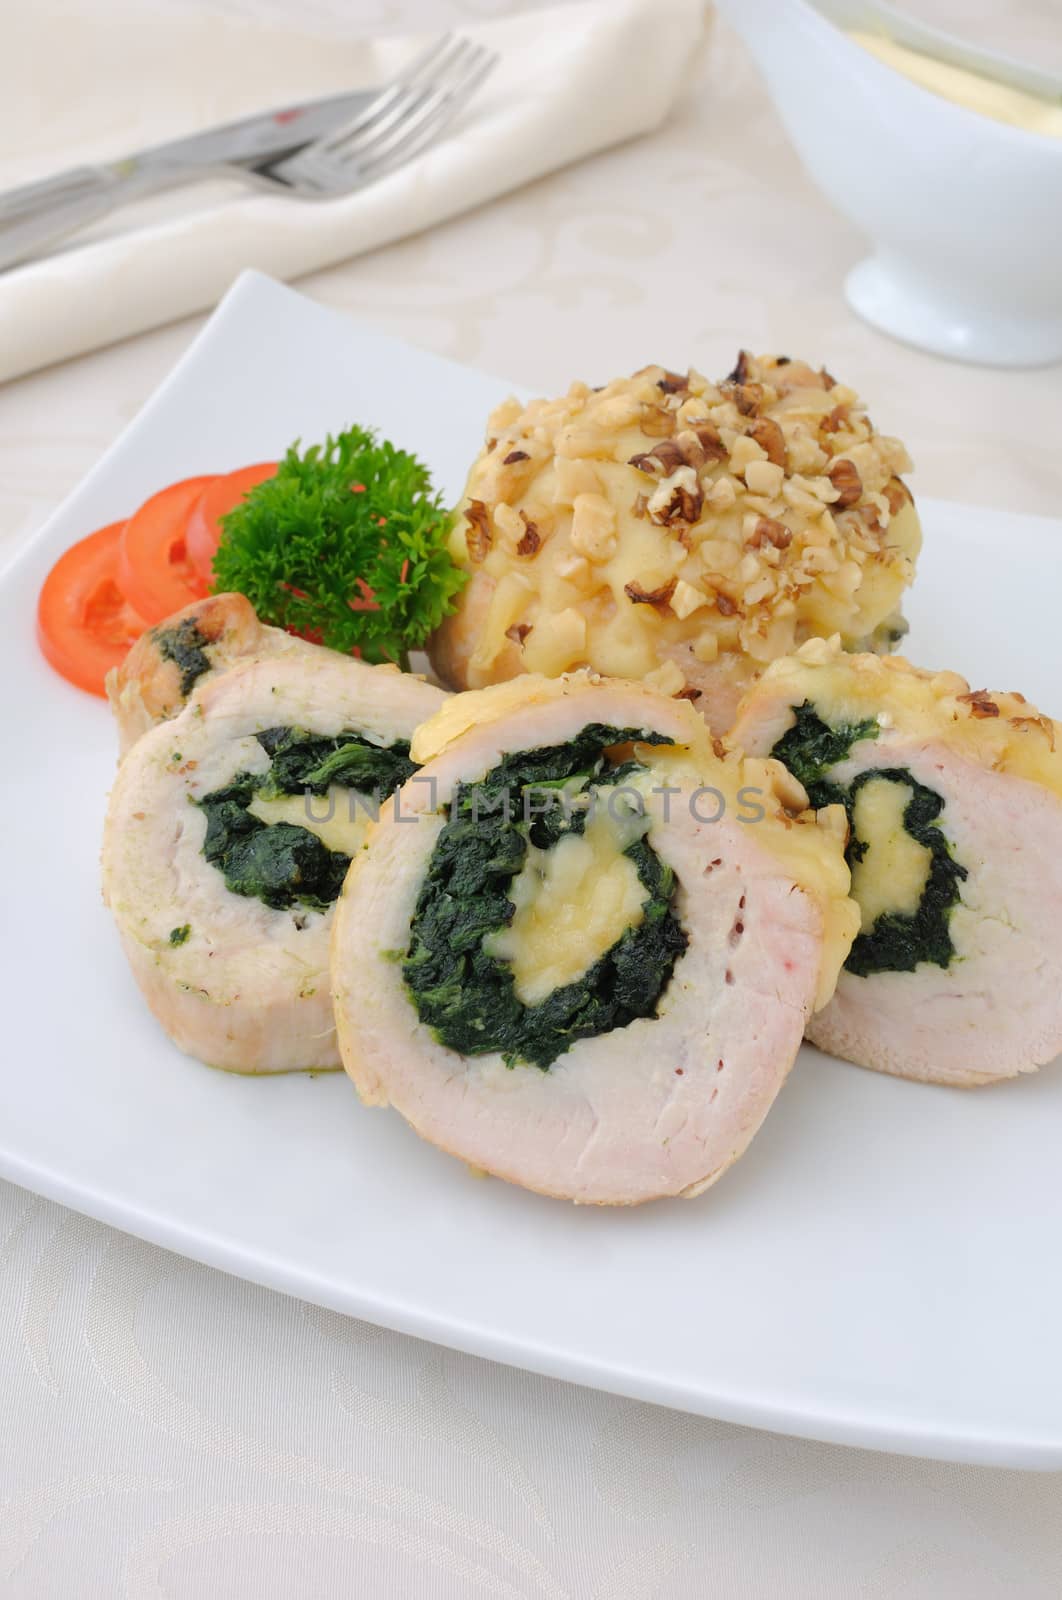 Chicken roulade stuffed with spinach and cheese by Apolonia